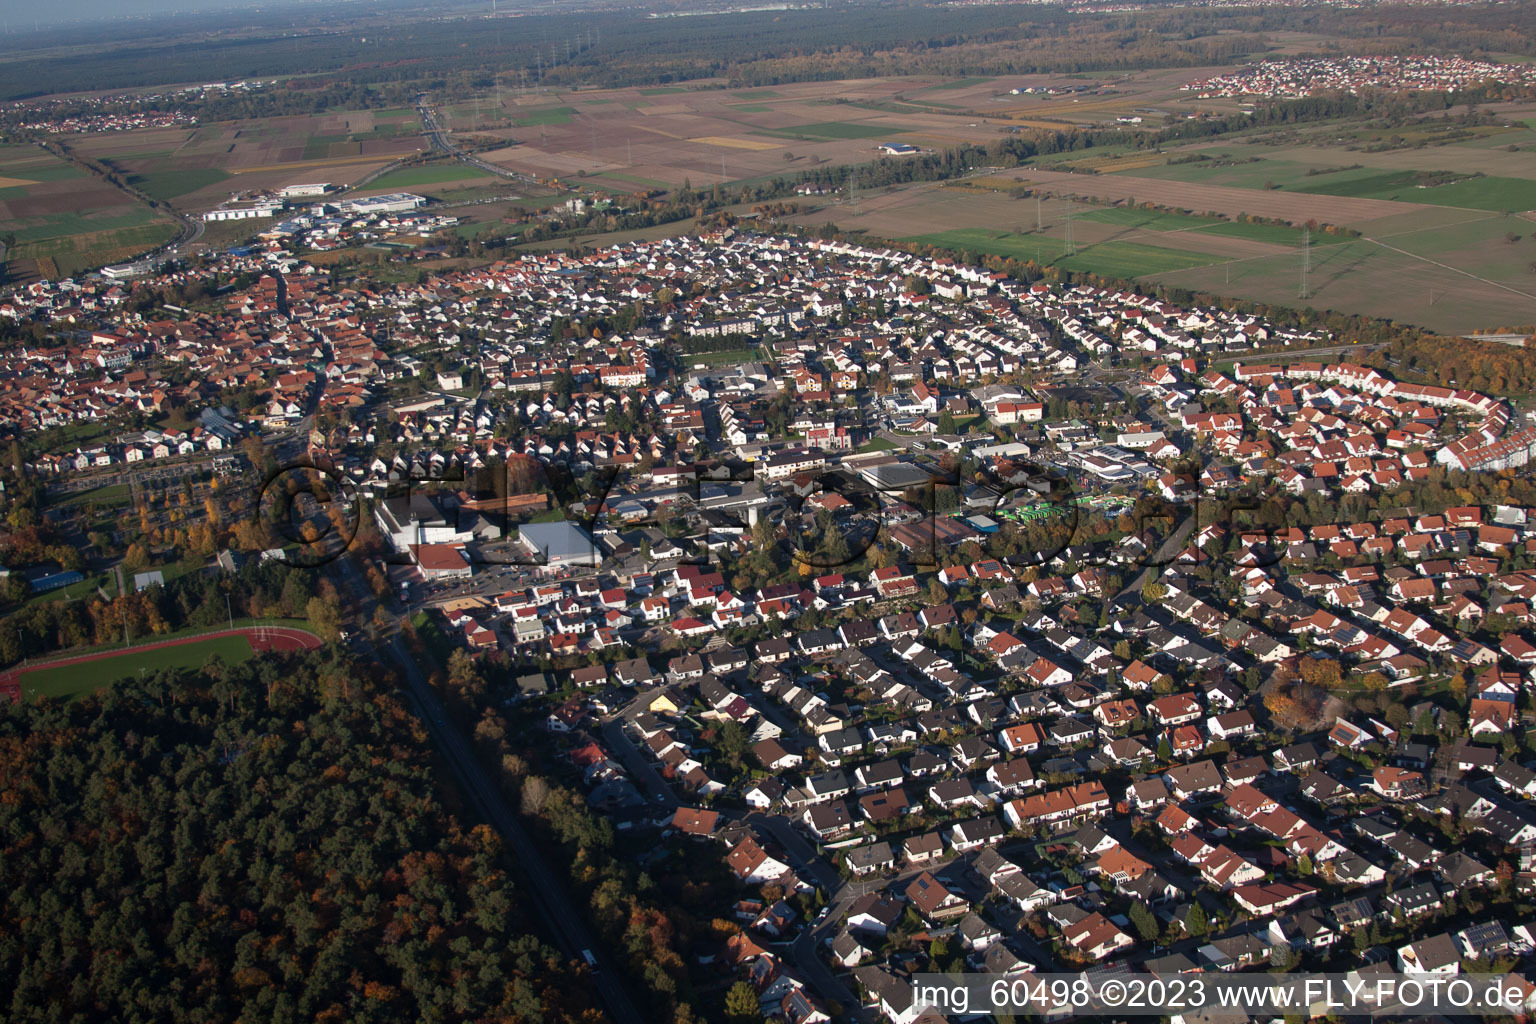 S in Rülzheim in the state Rhineland-Palatinate, Germany viewn from the air